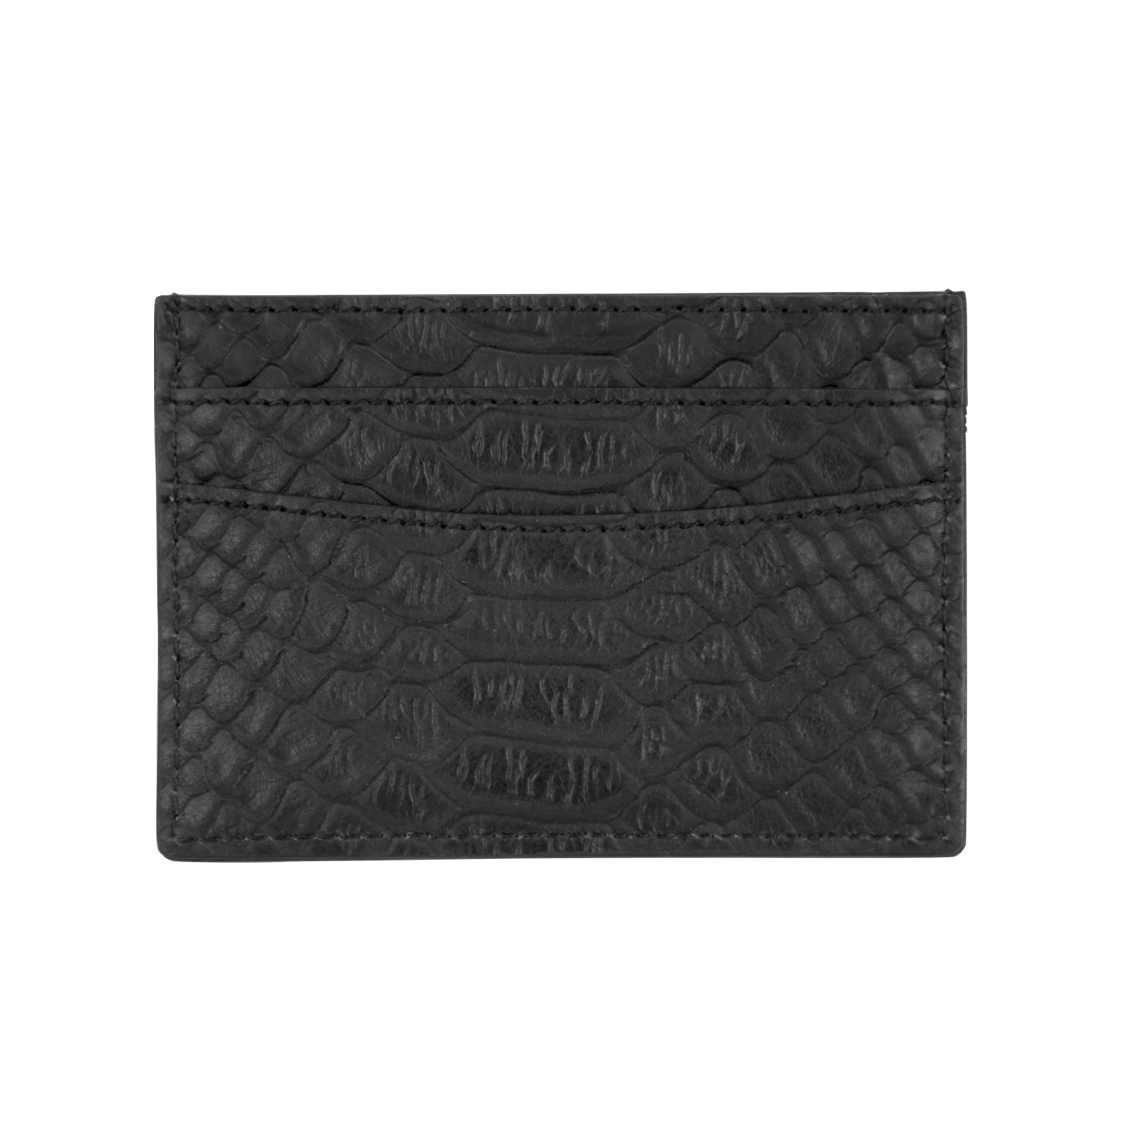 Card holder in embossed leather